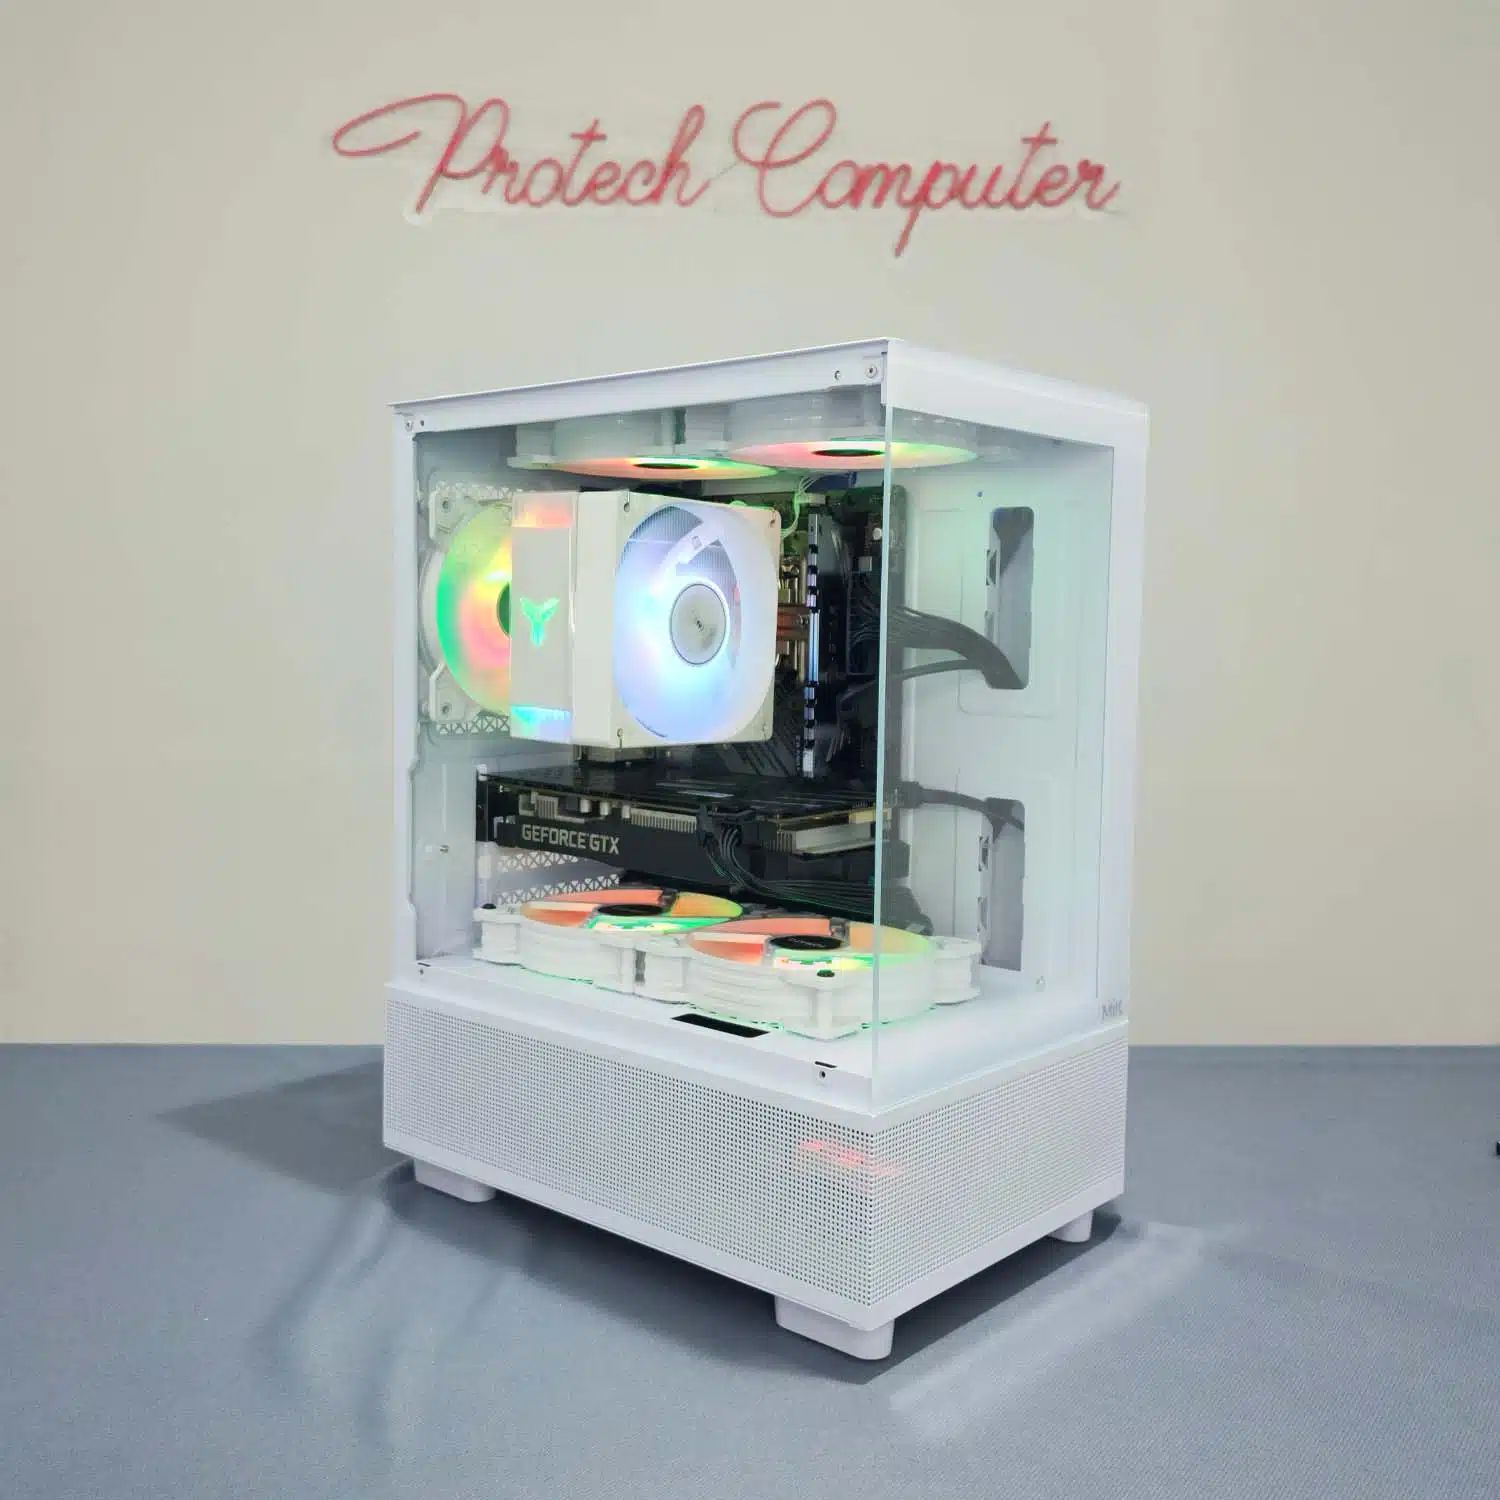 PC vỏ case Mik Aether White - Protech Computer